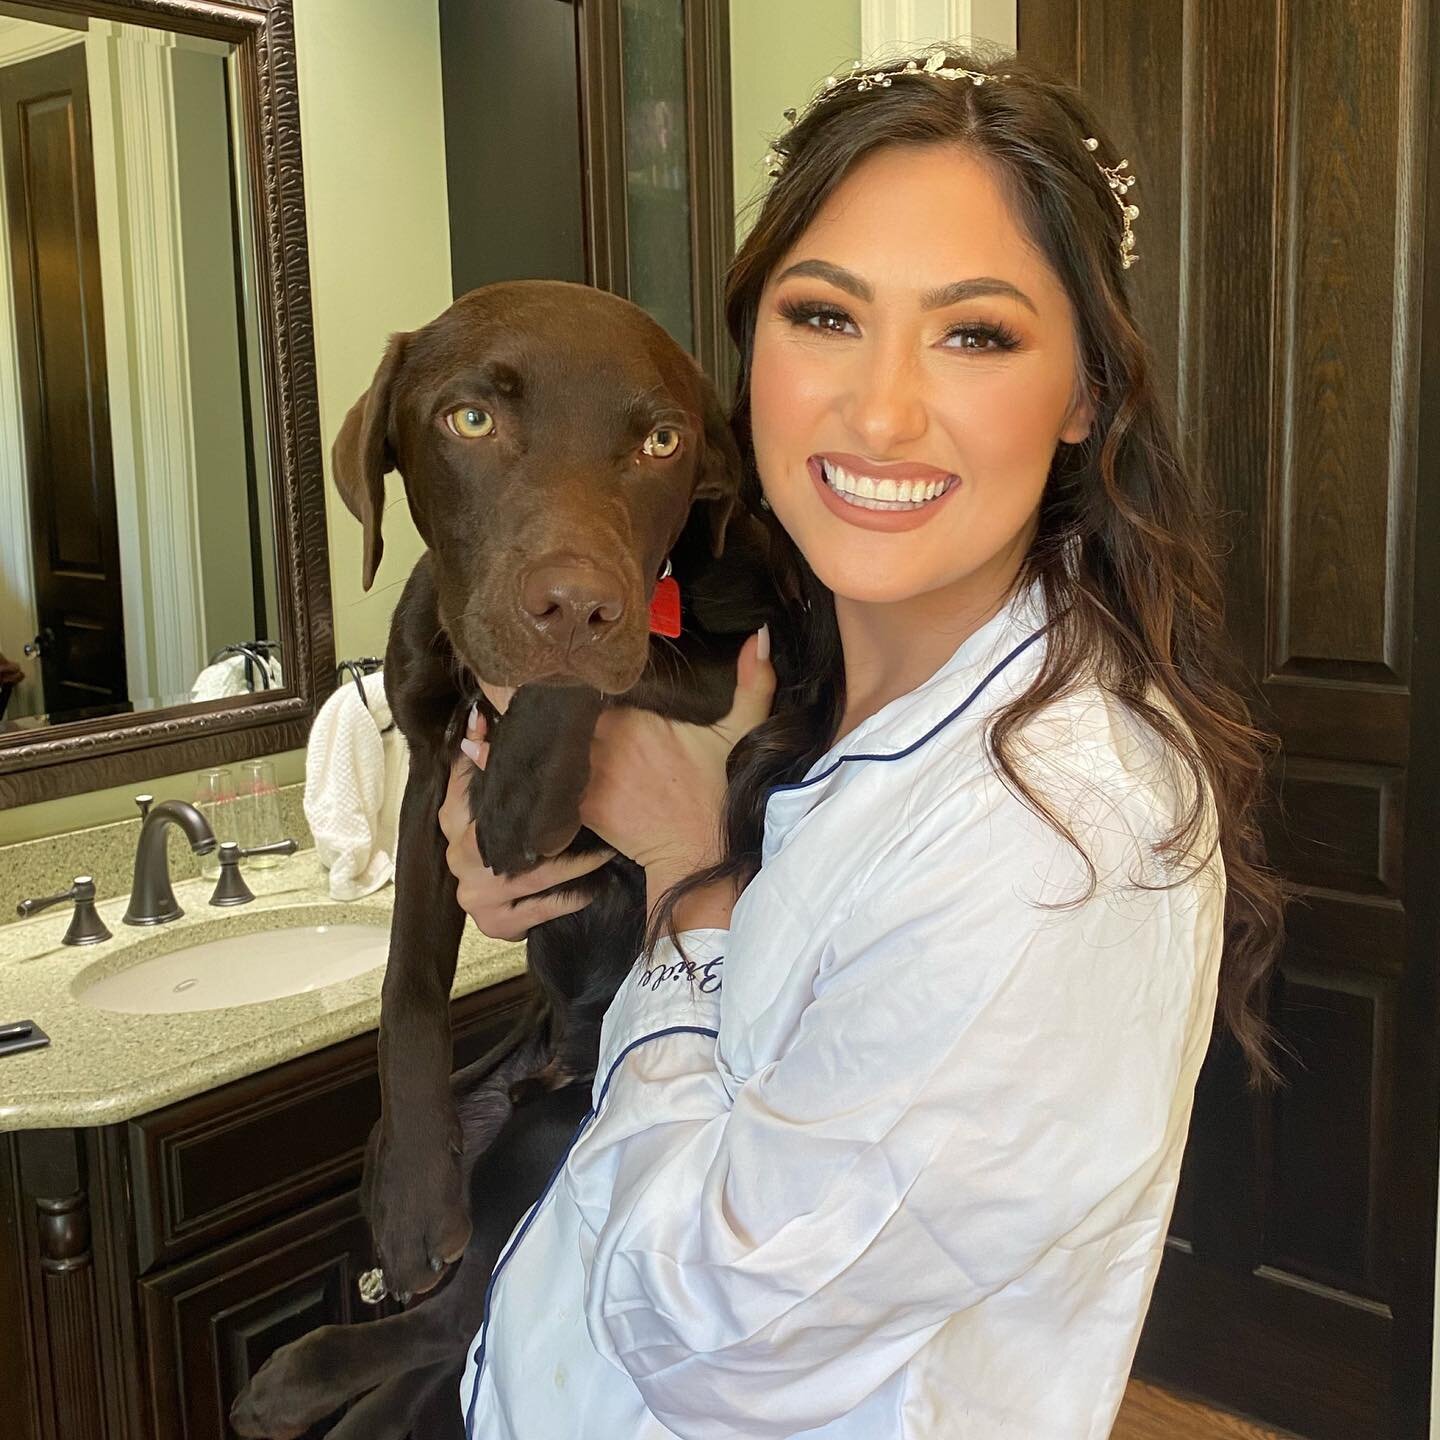 K from now on I&rsquo;m going to need all brides to have their pets with them on the wedding day🥺🥺🥺 @kristinlbass you&rsquo;re stunning!! Makeup by me and hair by @staceyskiles 🤩